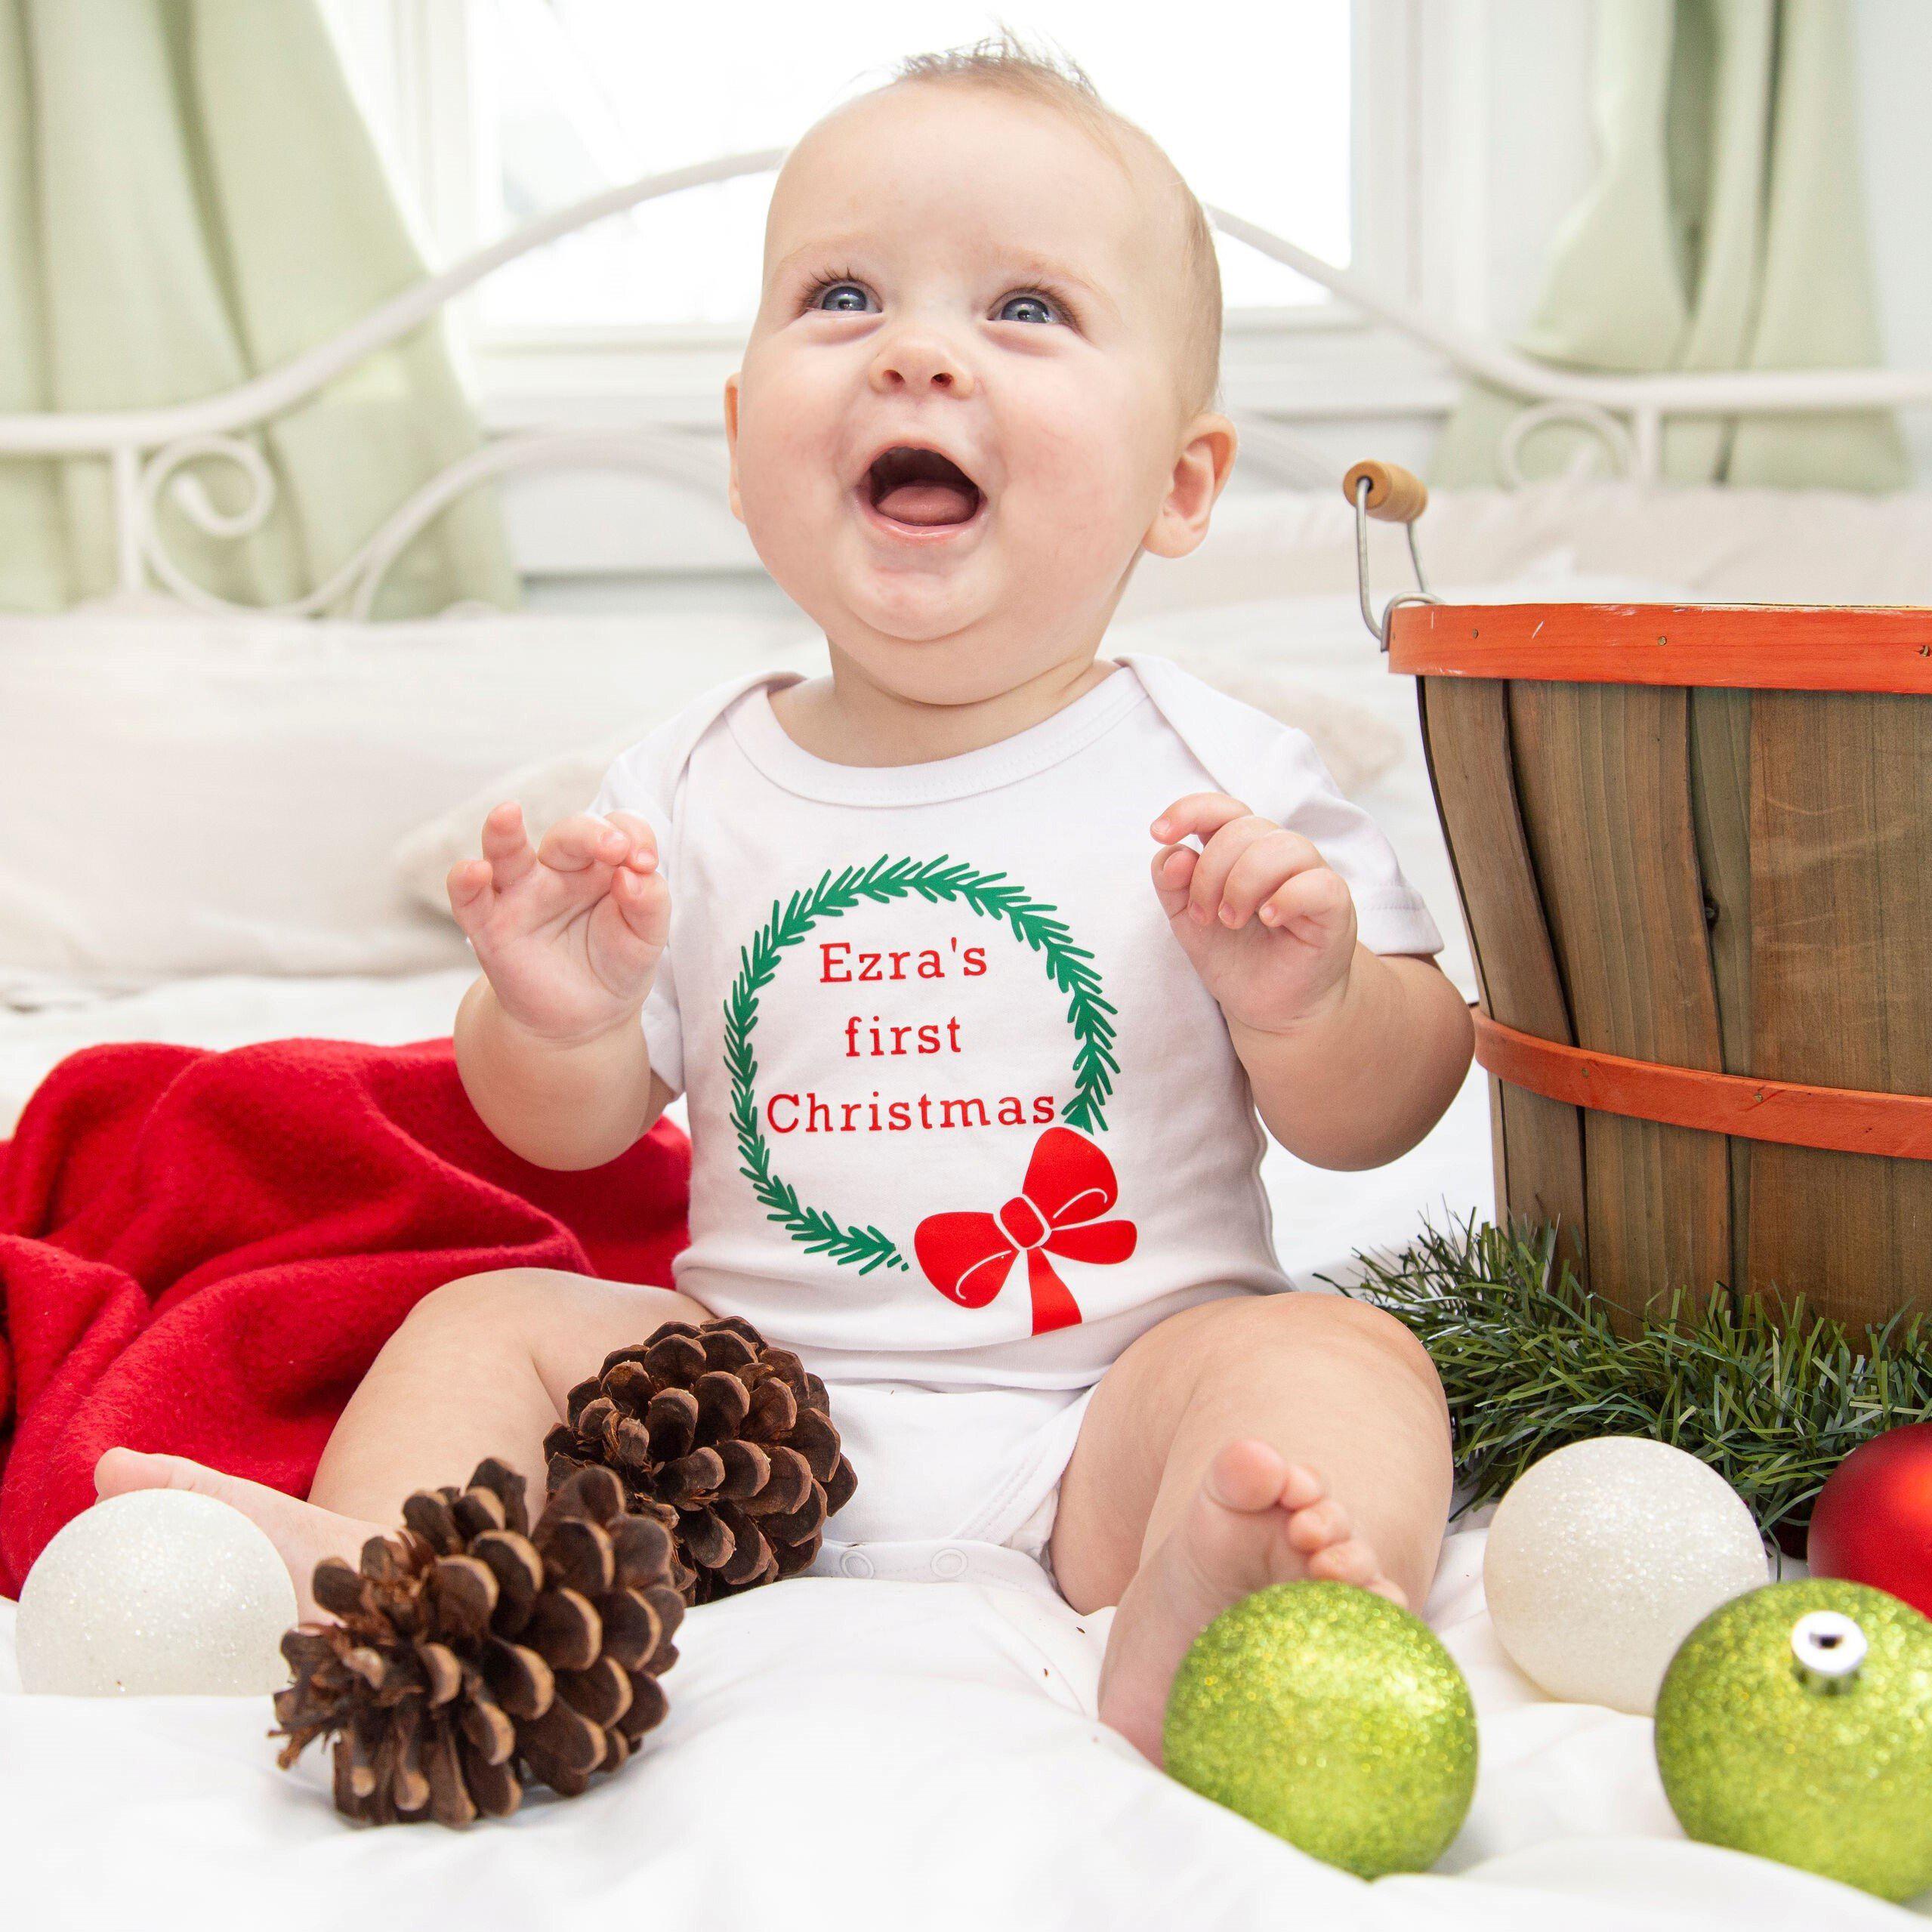 So Elfin' Cute Unisex One Piece Christmas Outfit for Baby Salt and Sparkle